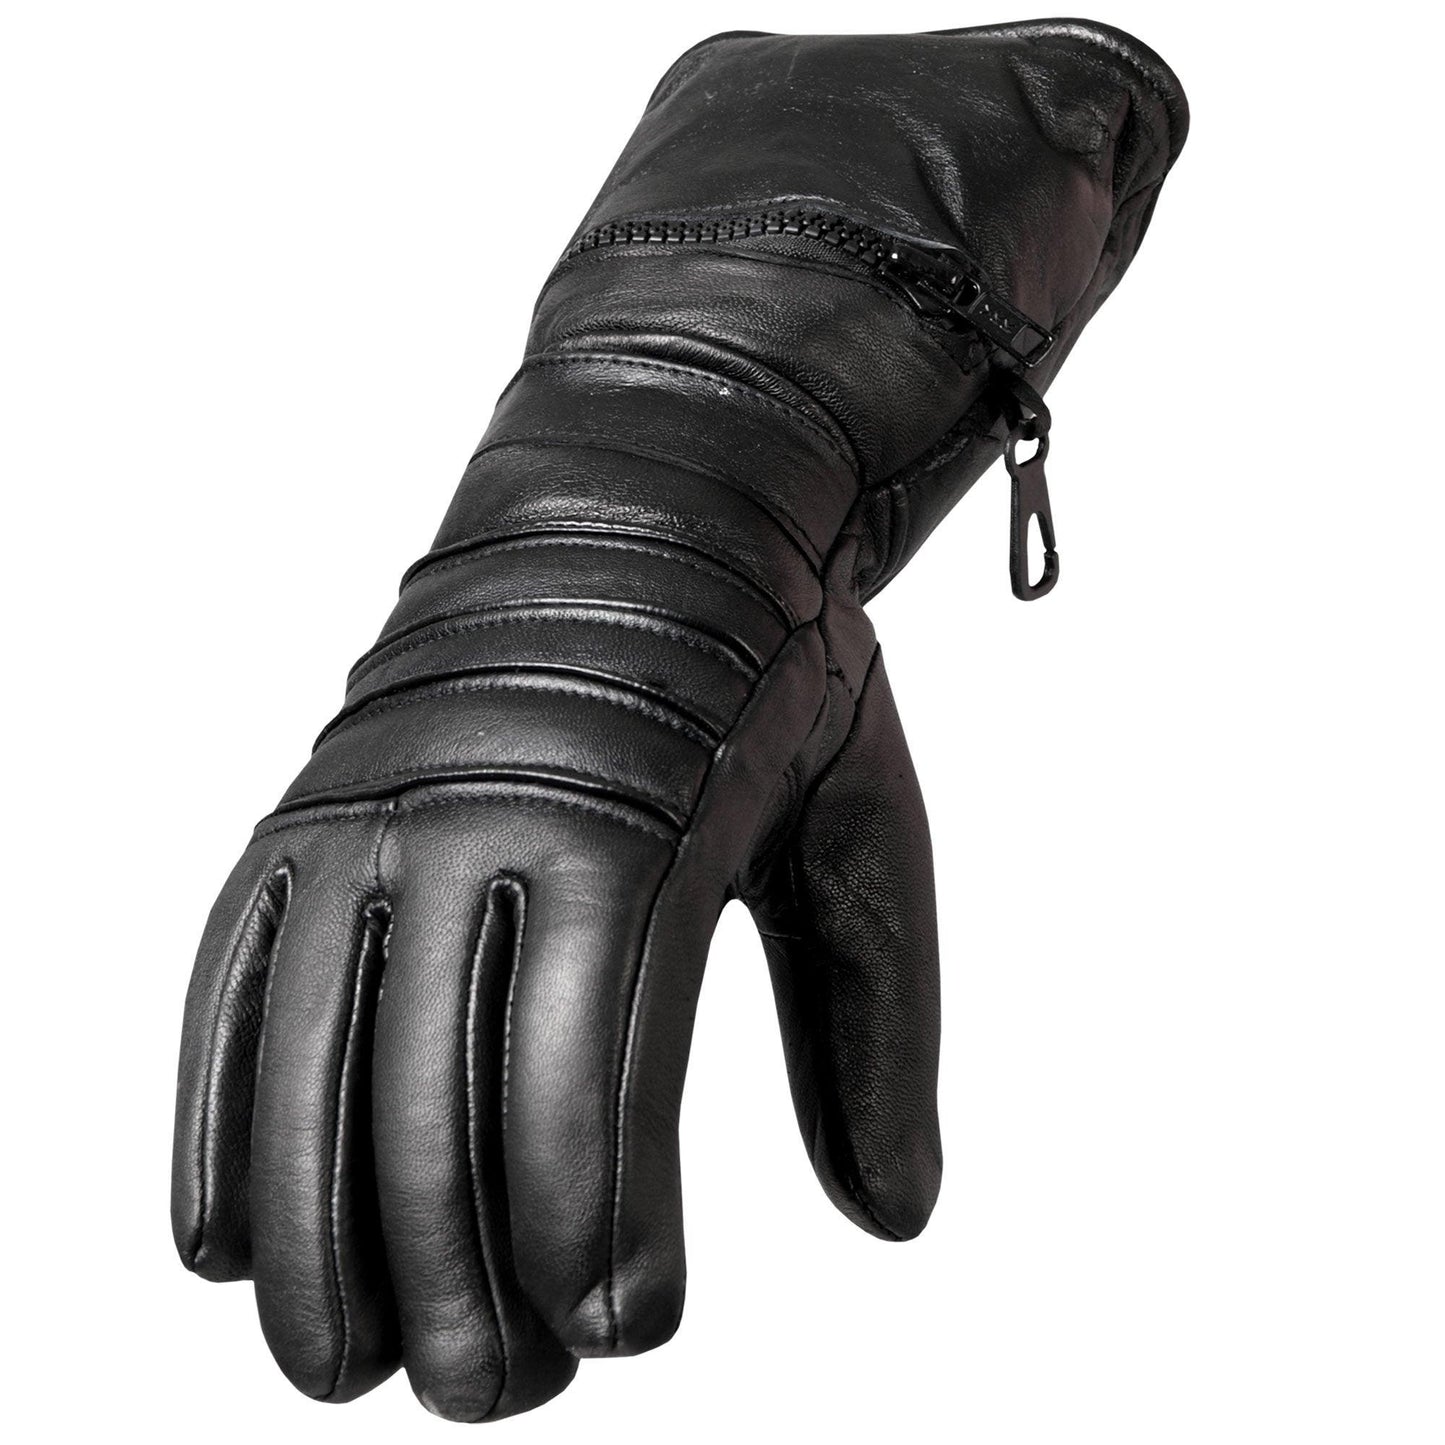 Motorcycle Gauntlet Gloves with Quilted Lining - Military Republic